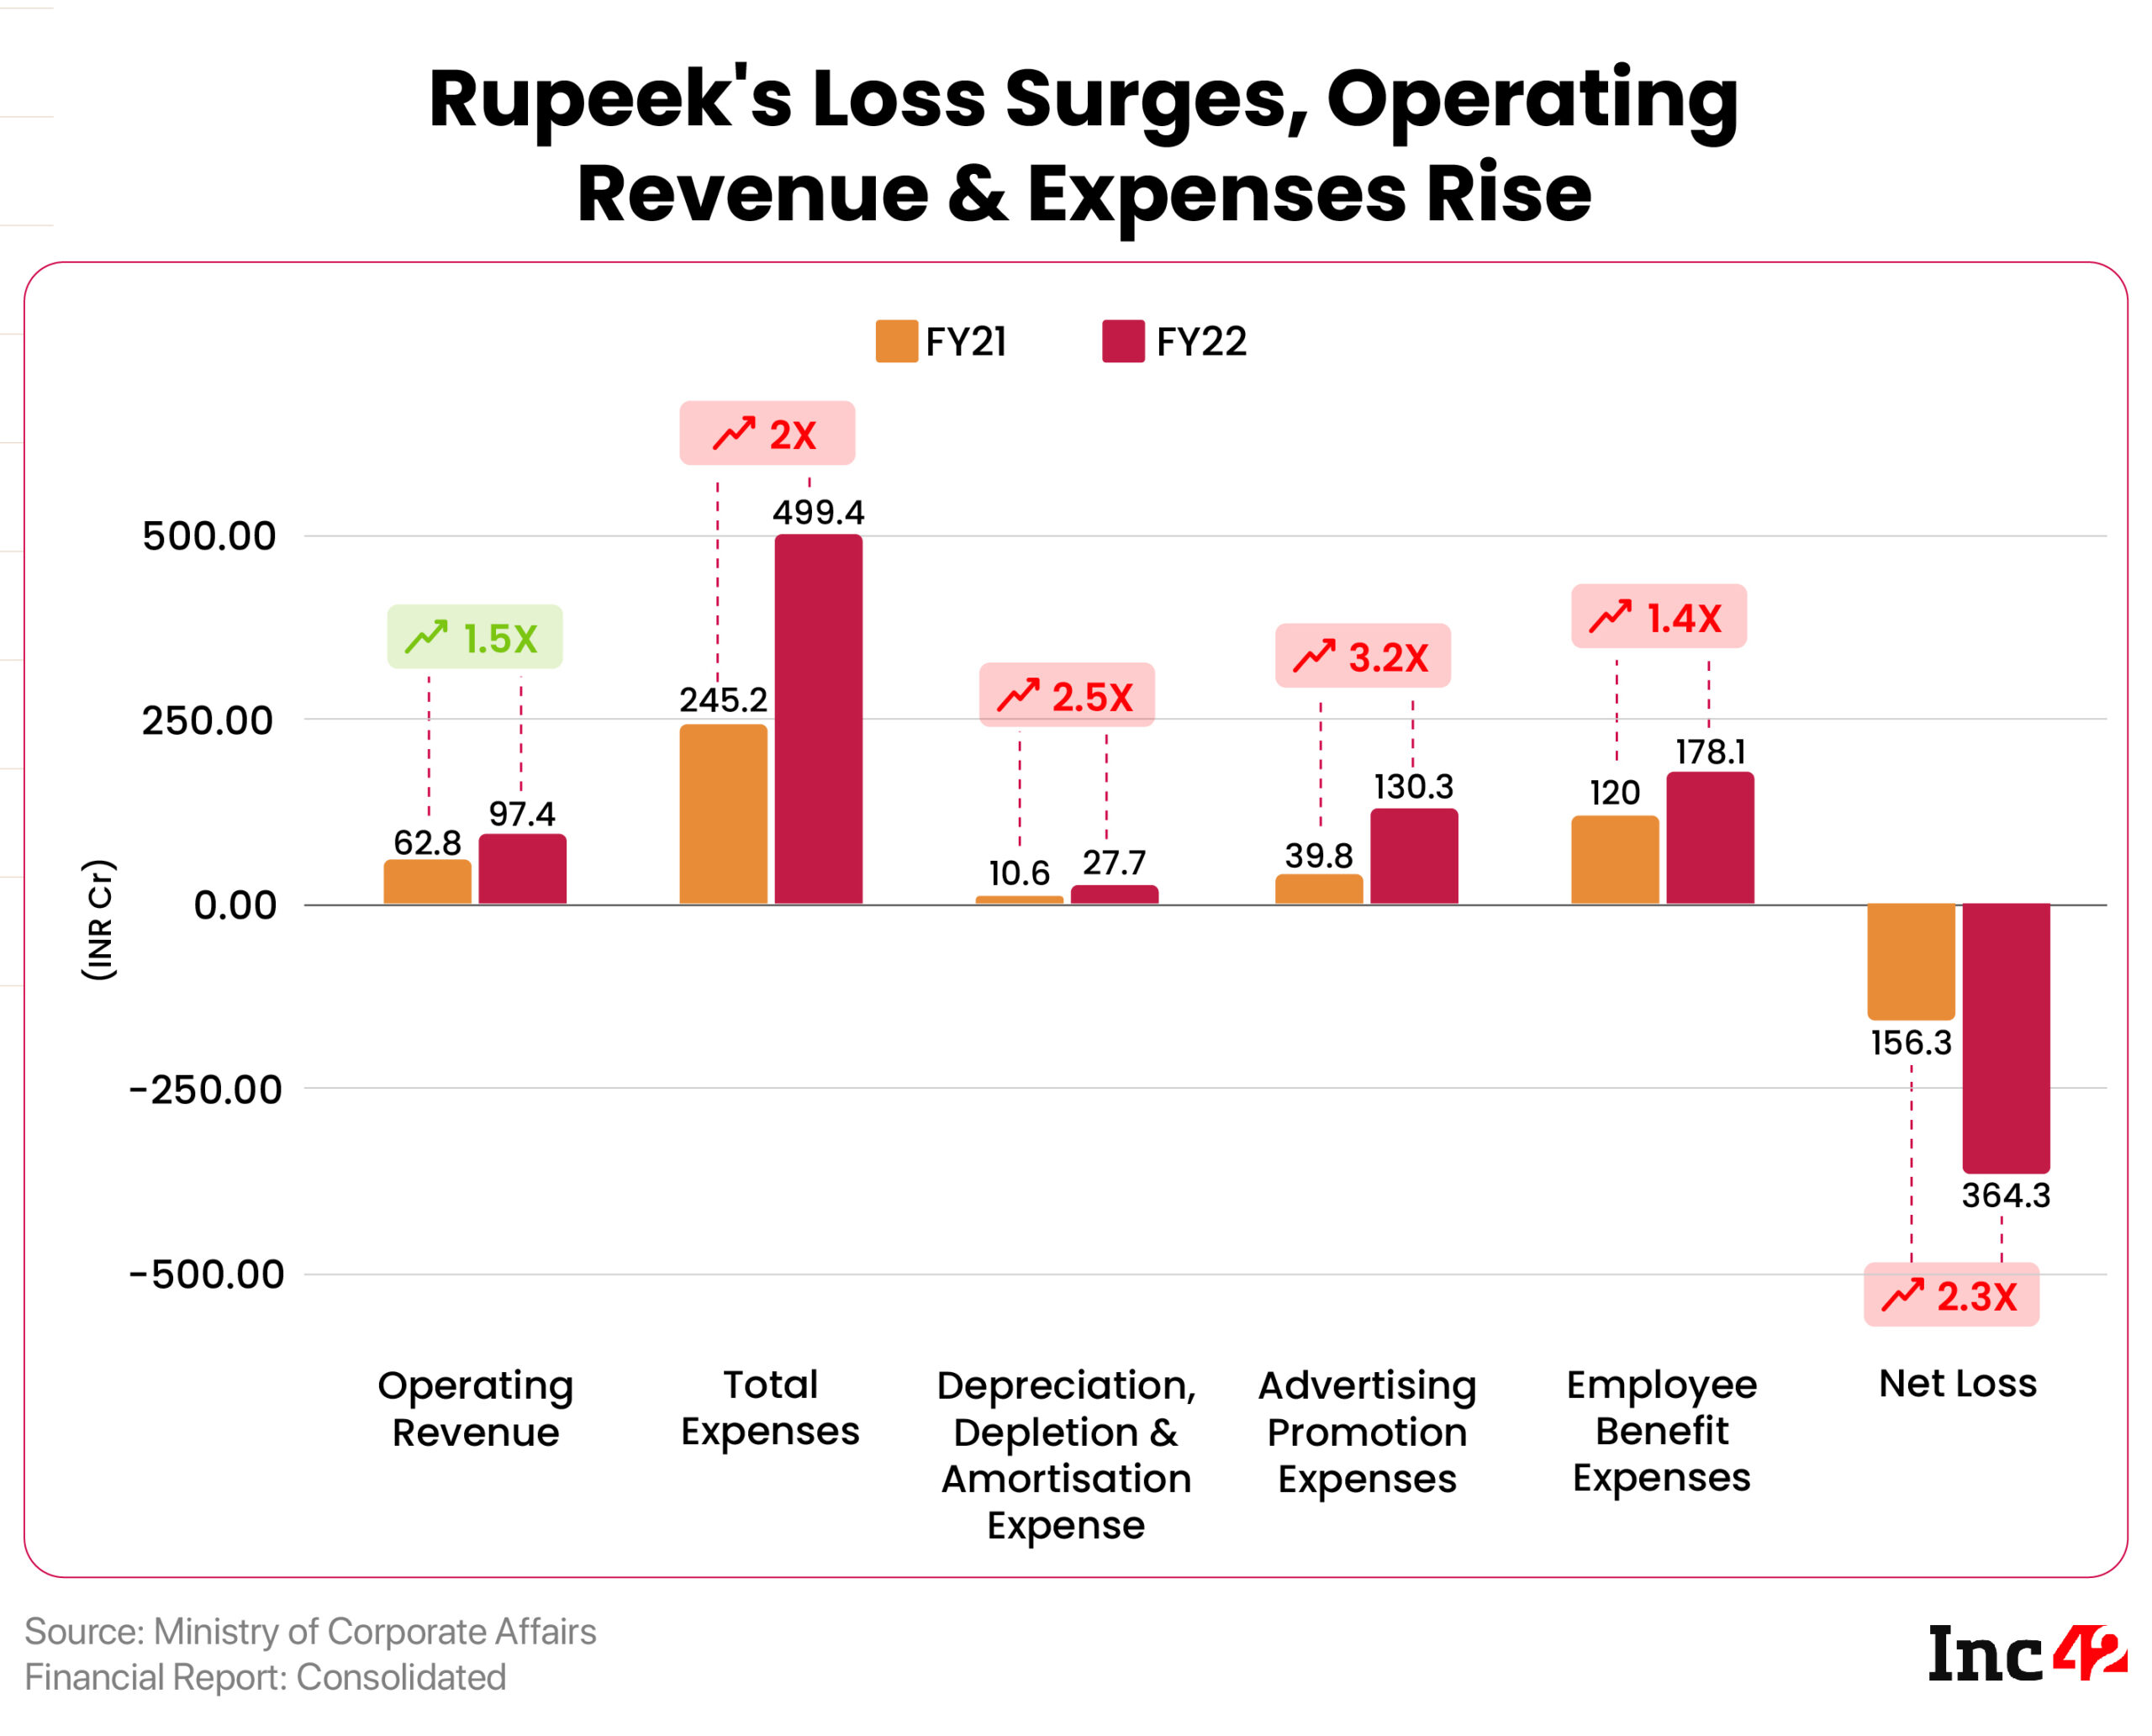 Sequoia Backed Rupeek’s Loss Widens By 2X To INR 364 Cr In FY22, Sales Increases To INR 97 Cr